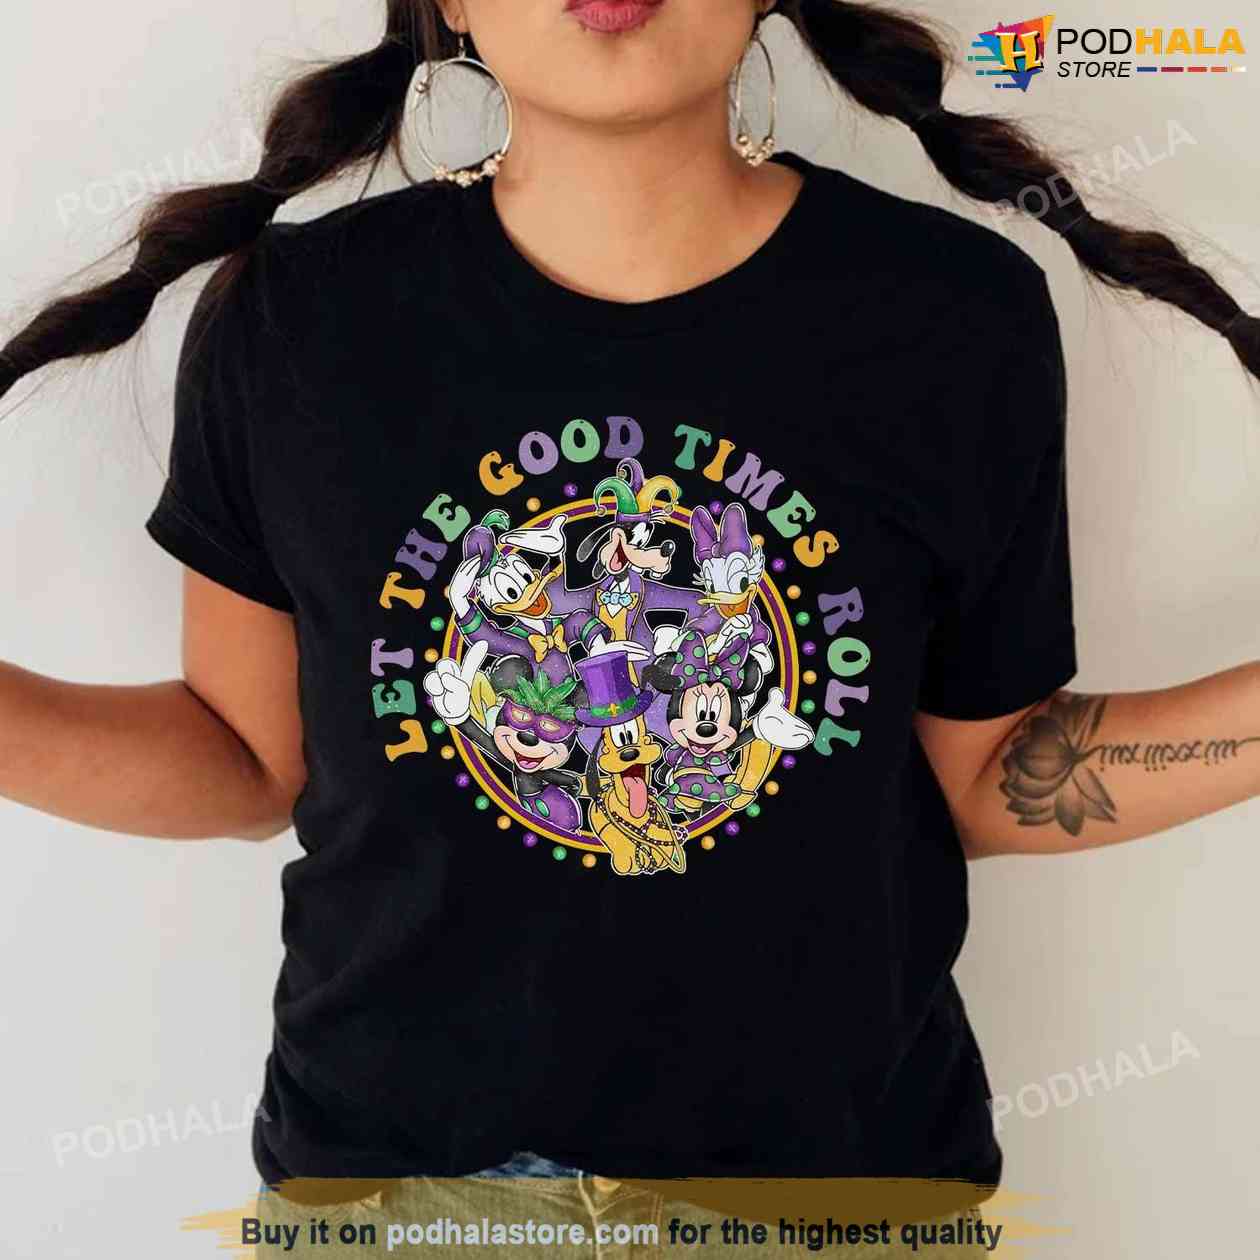 Let the Good Time's Roll Mardi Gras T-shirt for Women -  in 2023